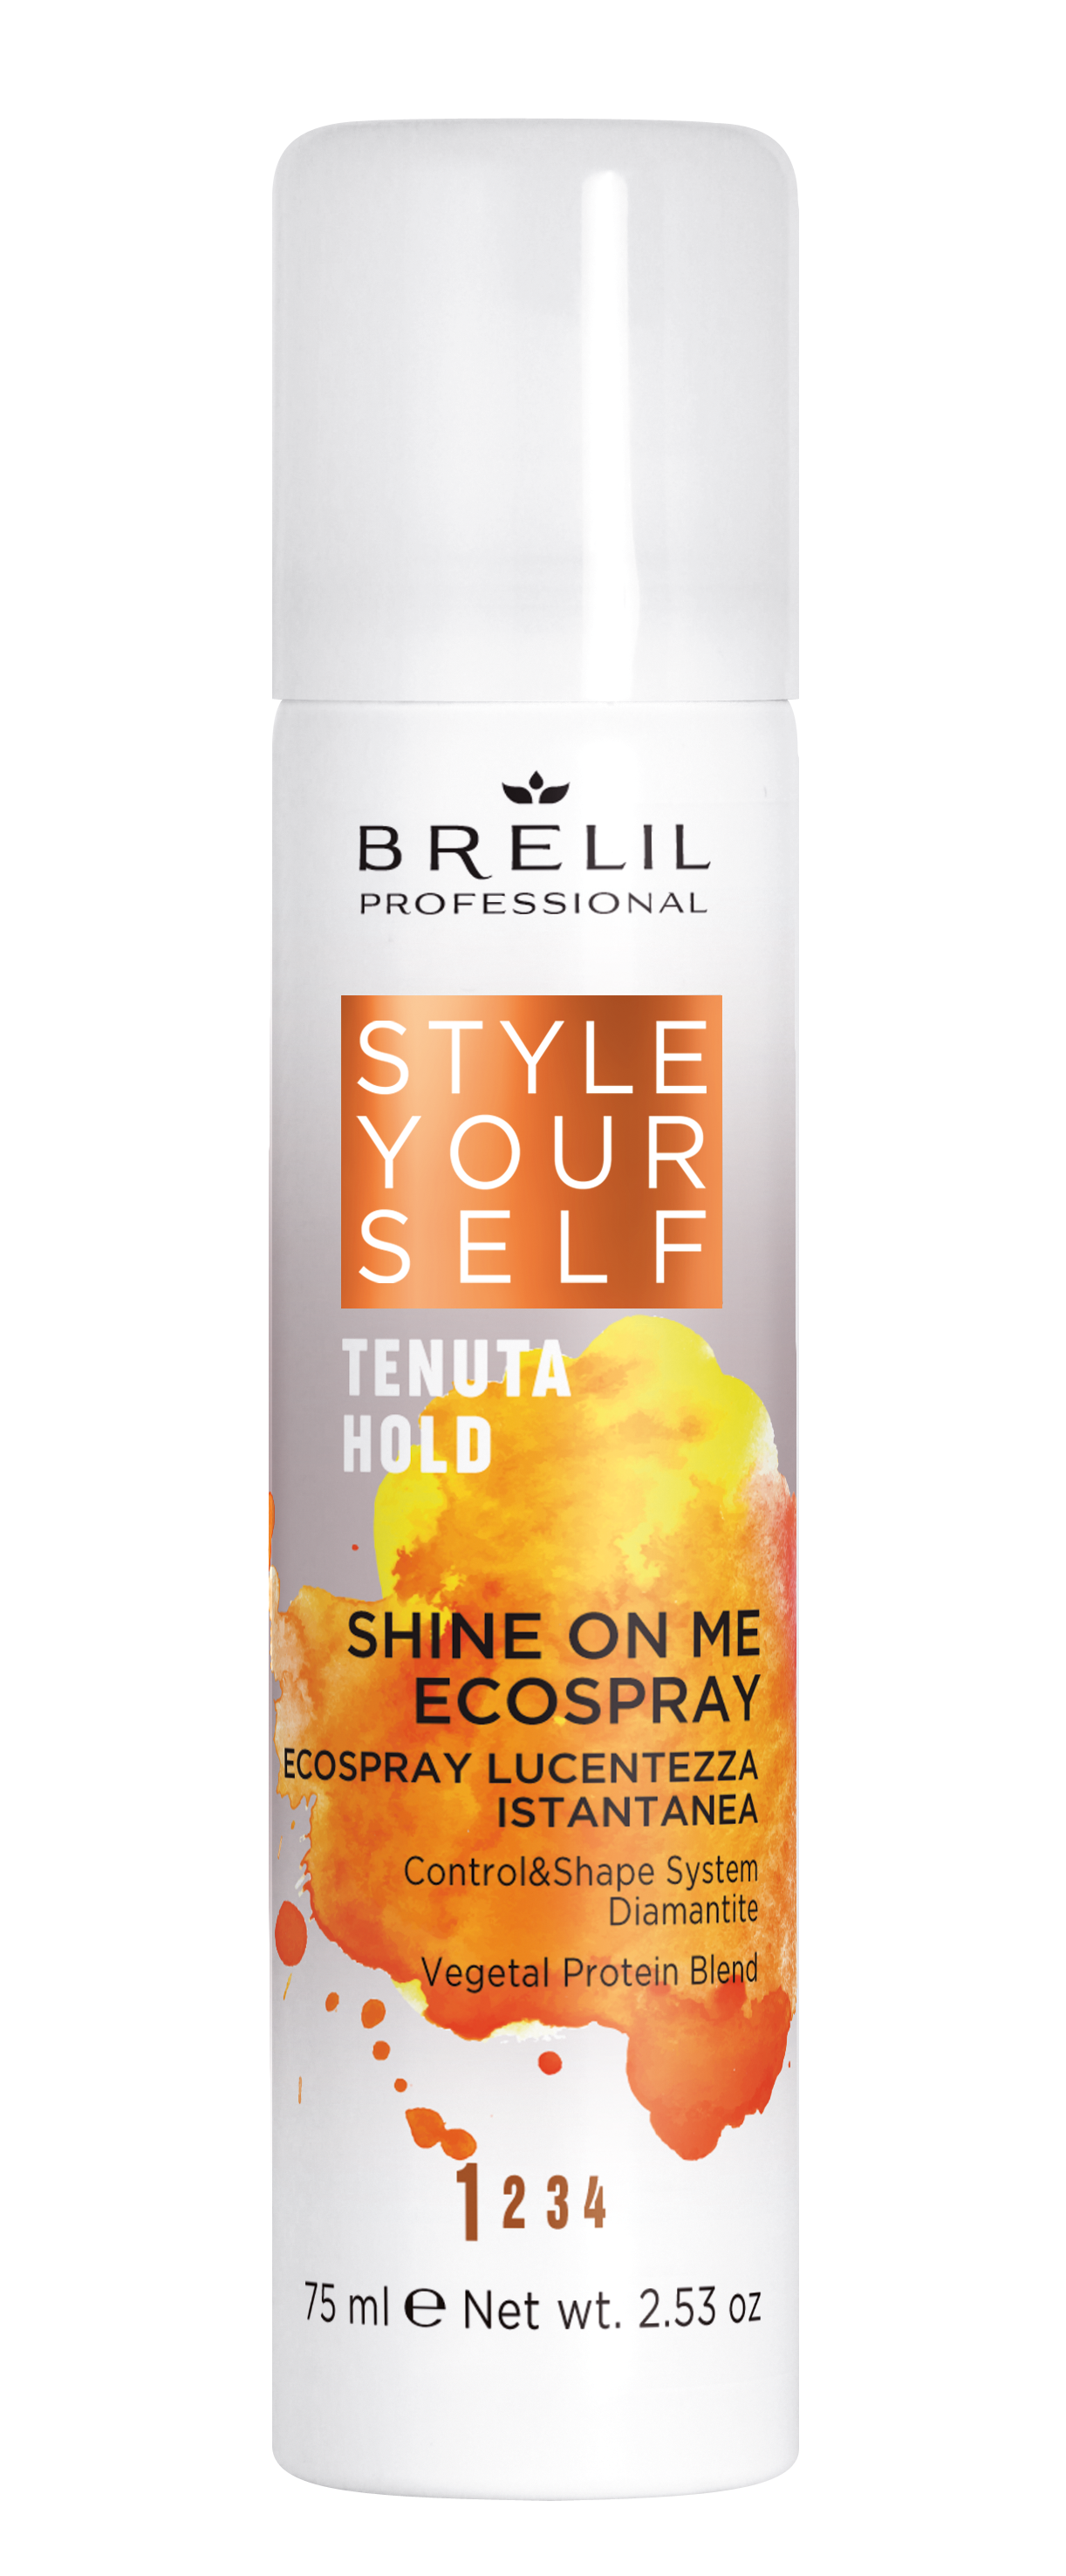 STYLE YOURSELF HOLD SHINE ON ME ECOSPRAY